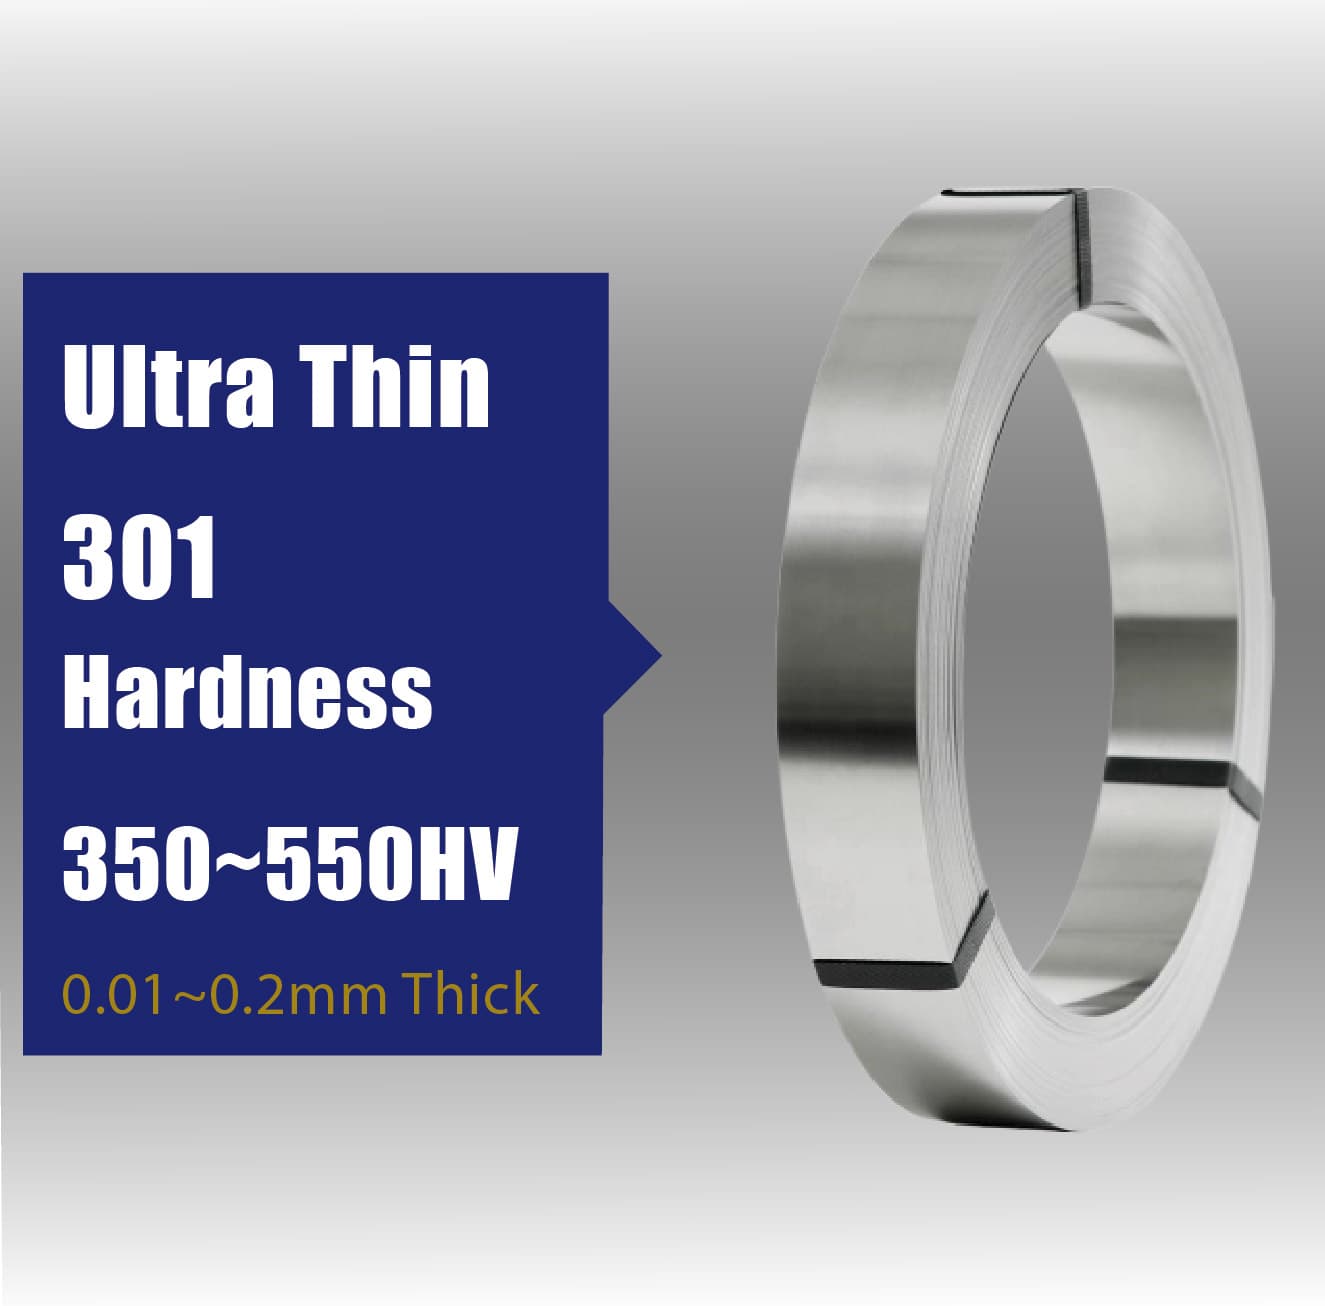 Ultra Thin 301 Stainless Steel foil